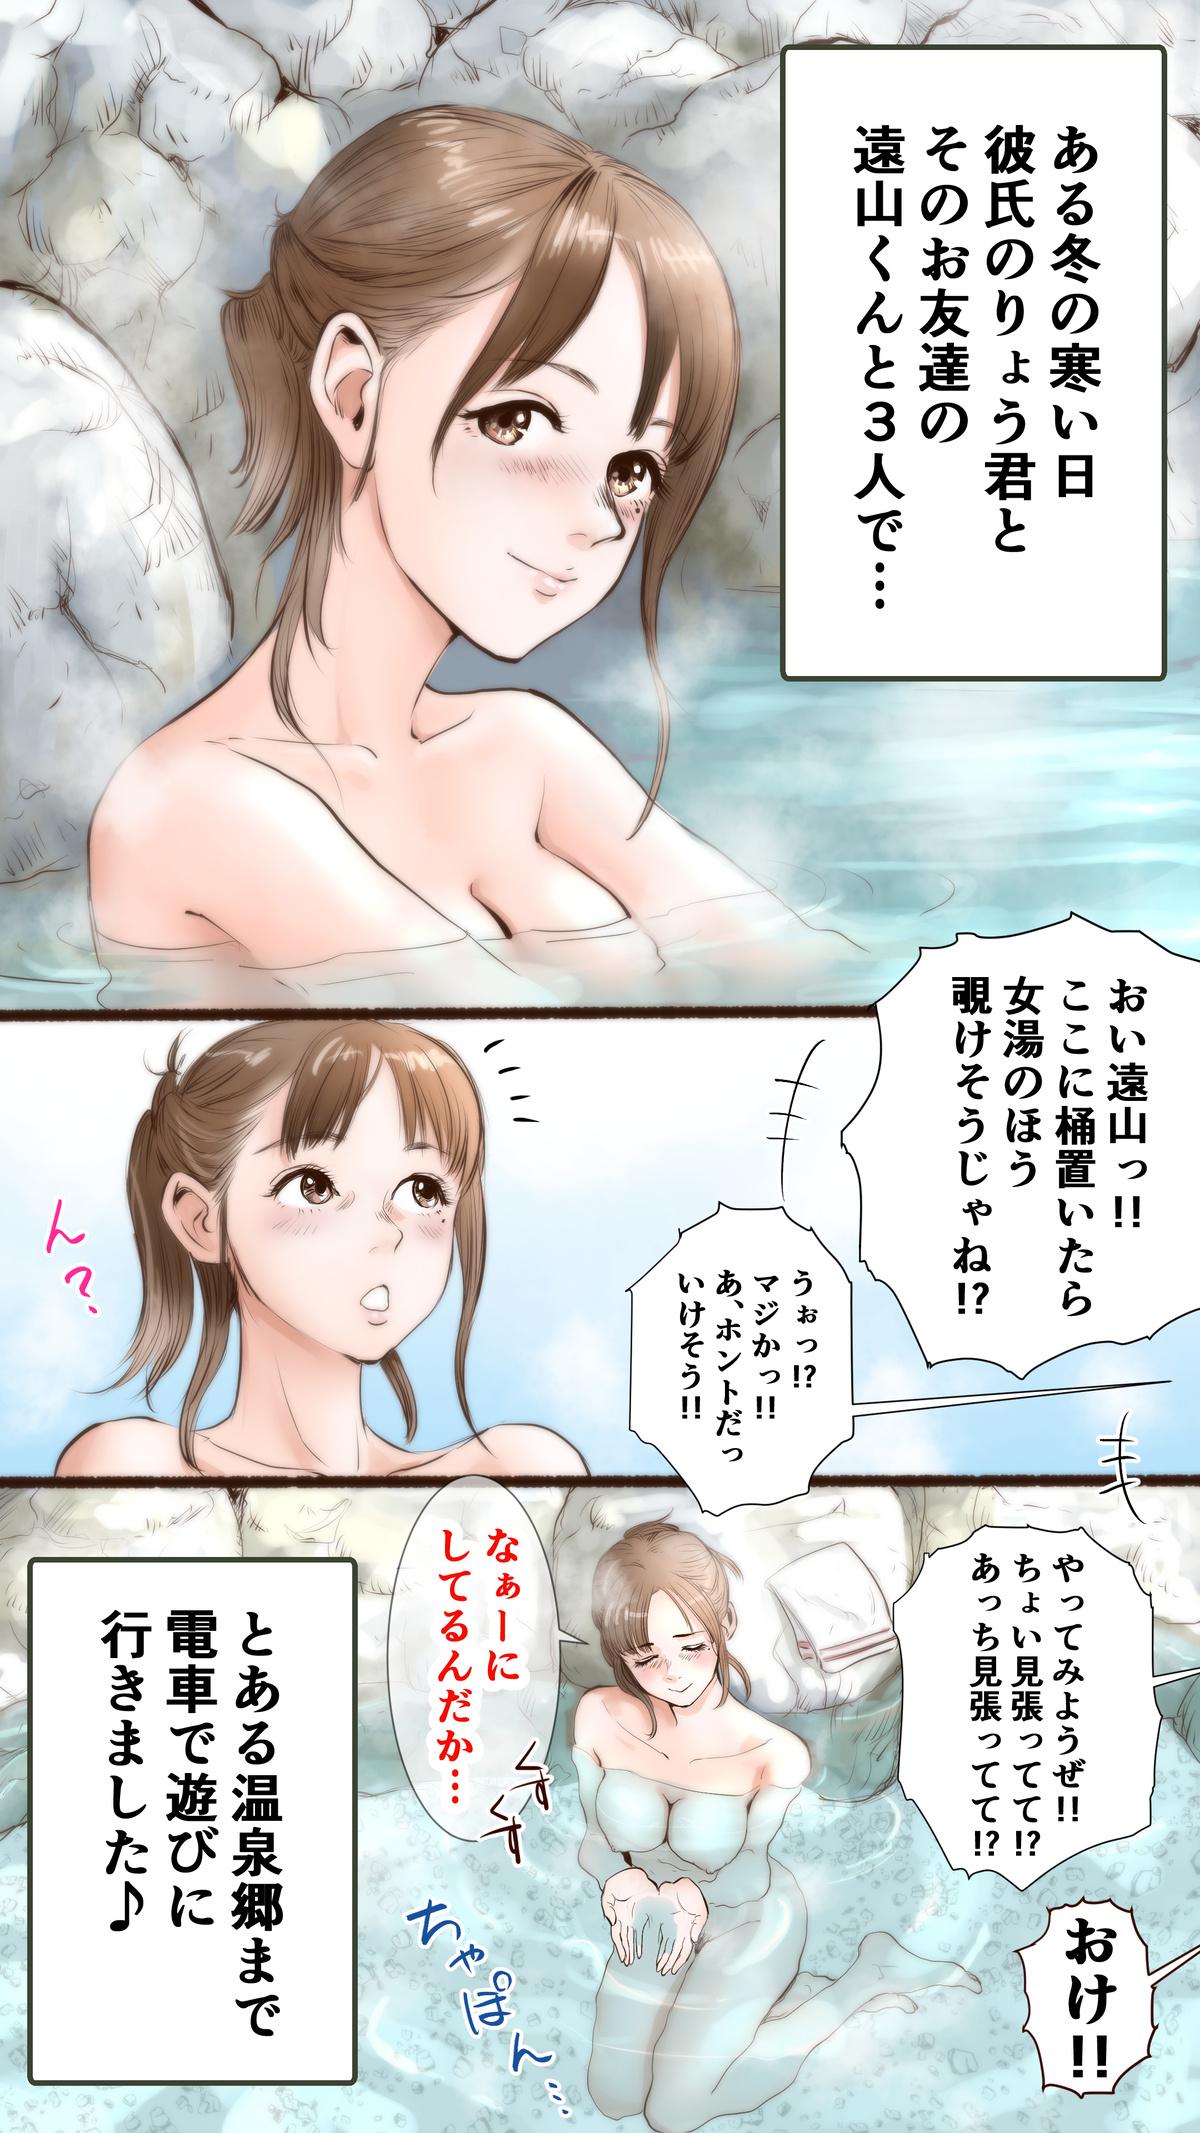 Compilation Story of Hot Spring Hotel Pervert - Page 1